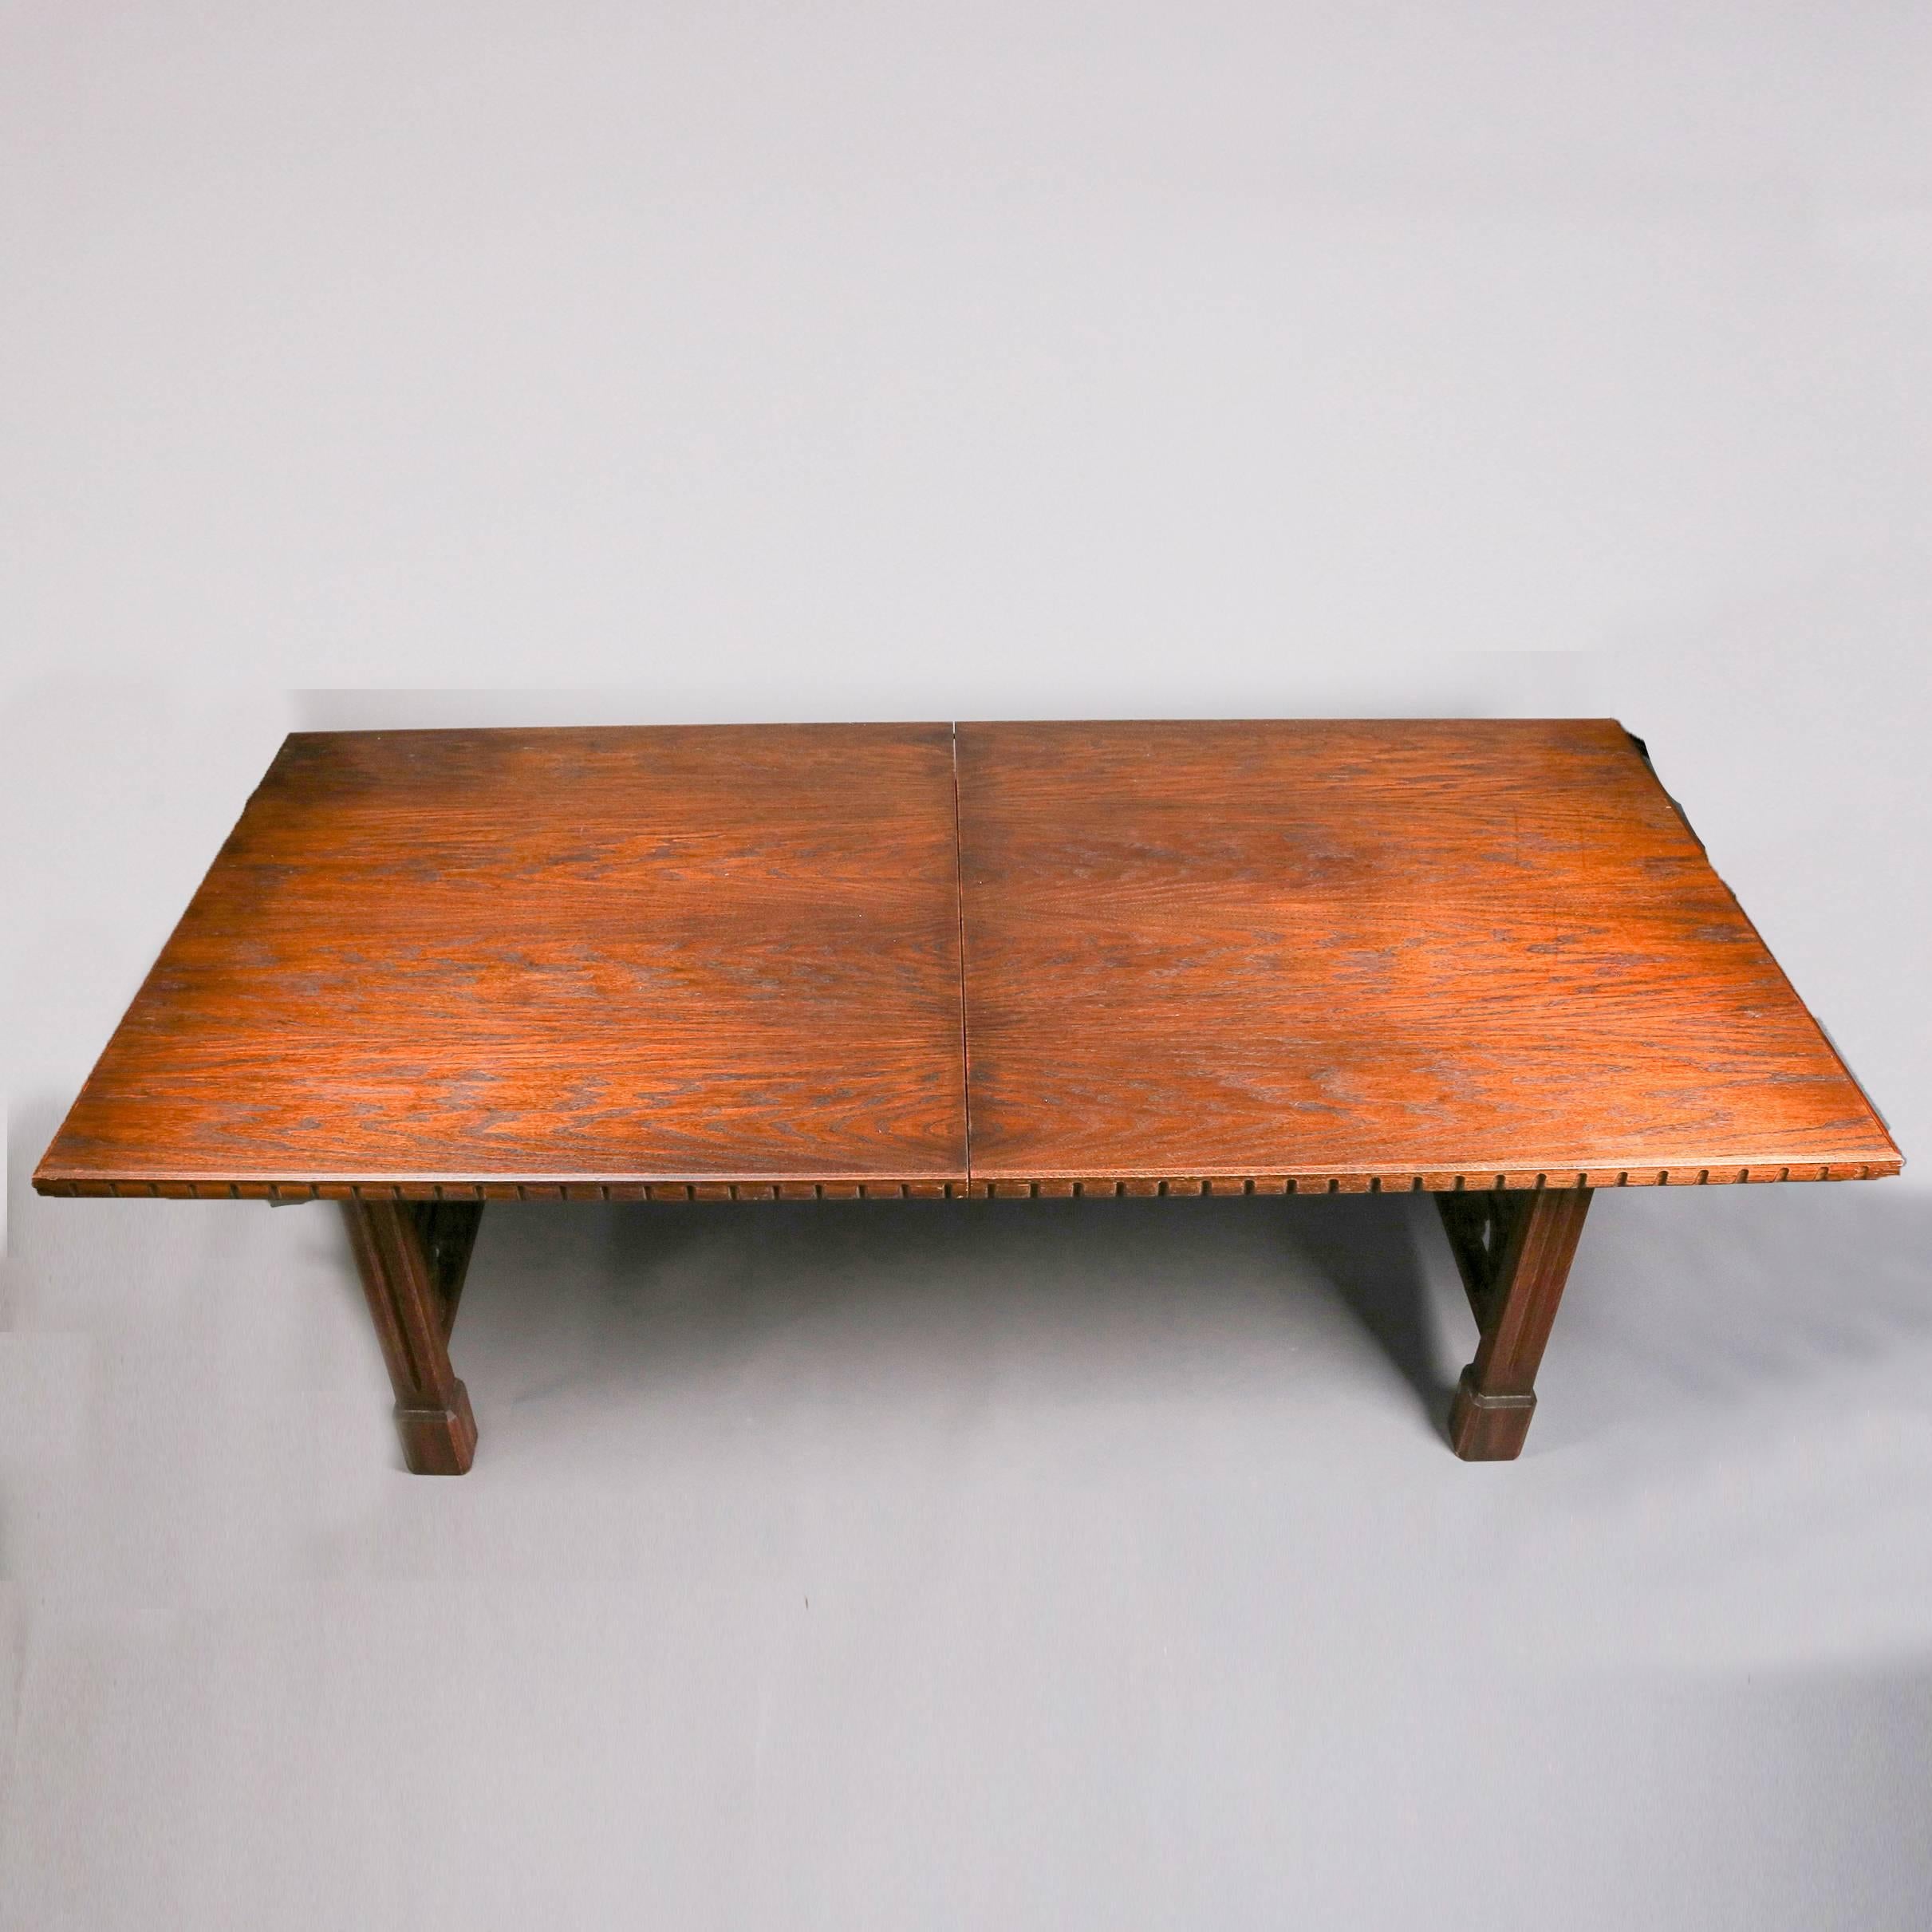 Antique English walnut Gothic trestle table features cathedral arch form carved and pierced sides and dental form carved edges, with two leaves, 19th century

Measures:  29.5" H x 90" W x 44" D, 2 leaves 18" W each, 126" W